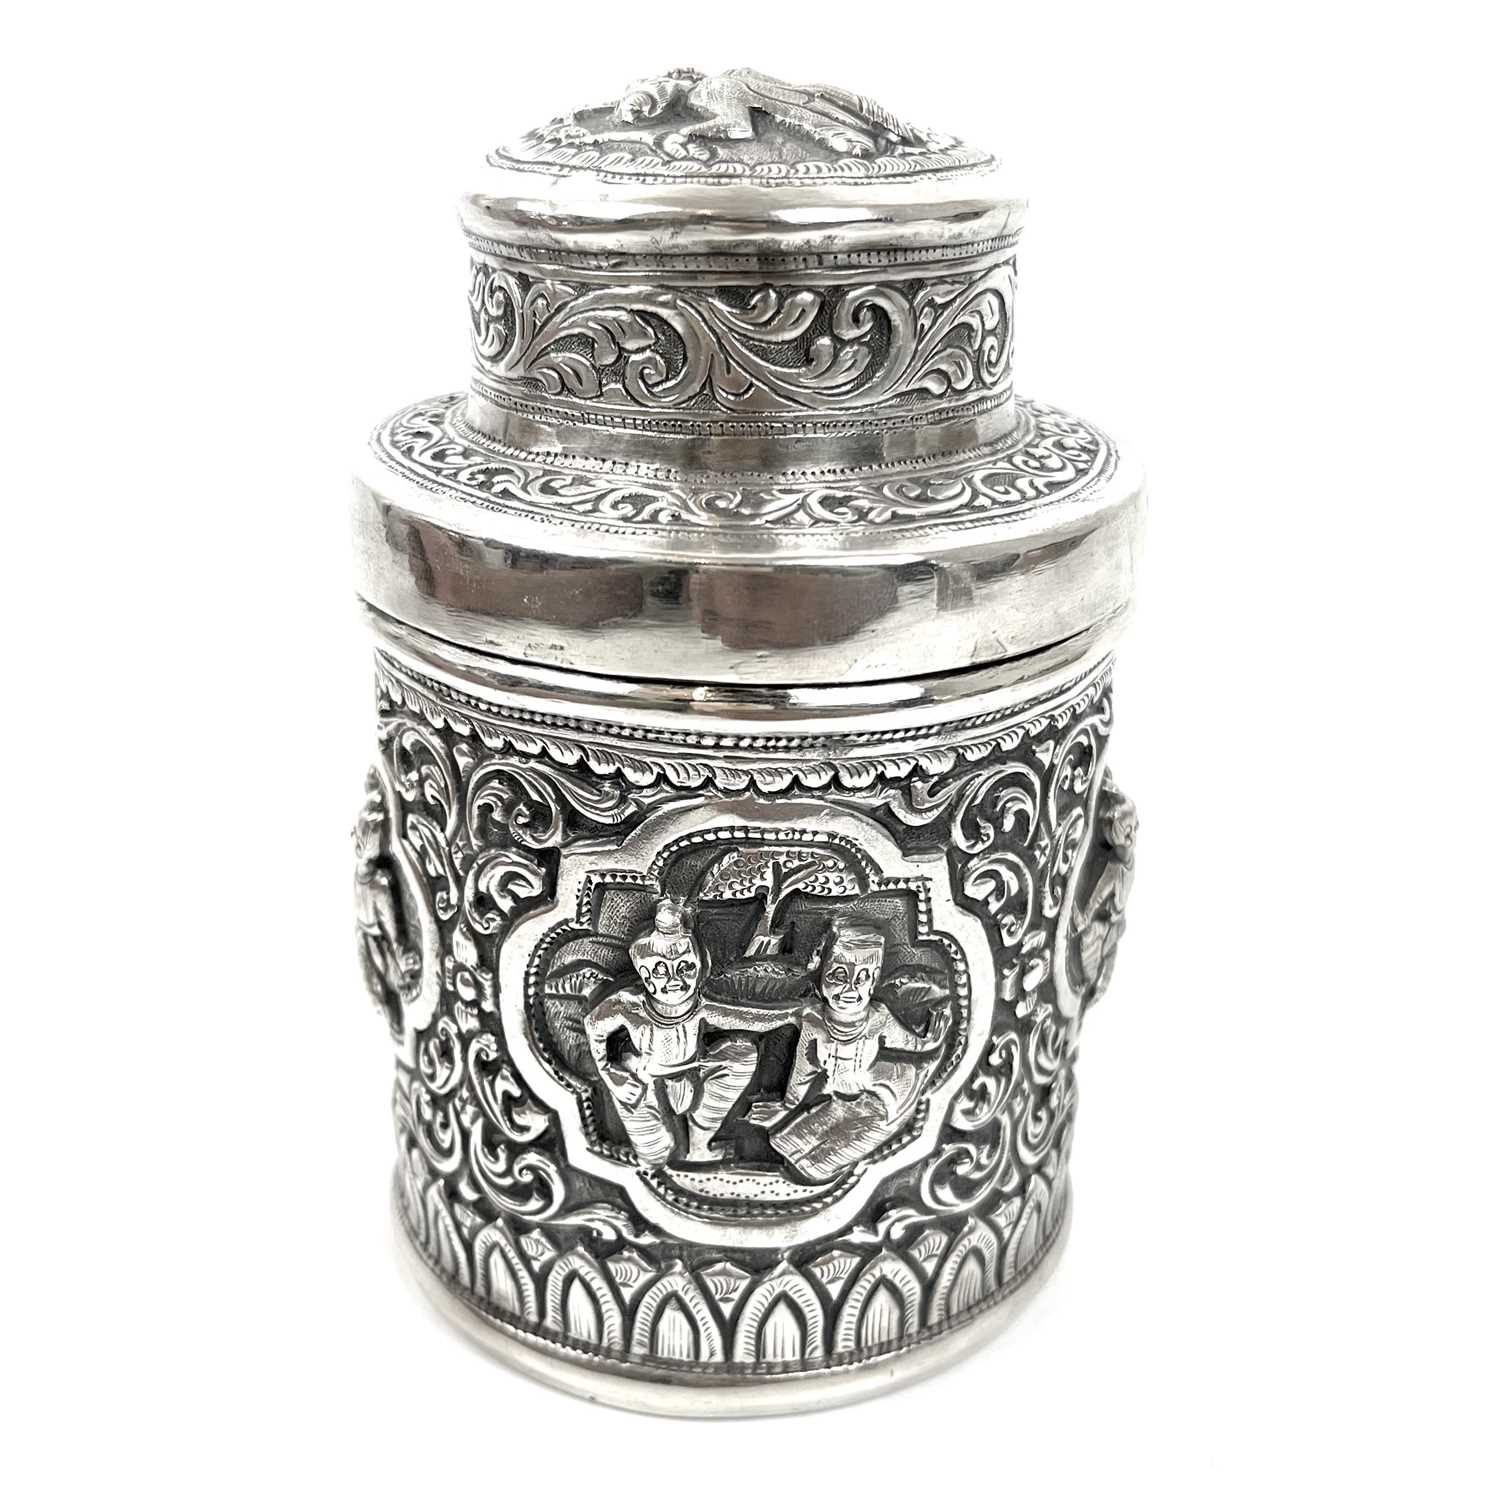 Two Burmese silver lidded cannisters, mid 20th century - Image 4 of 25